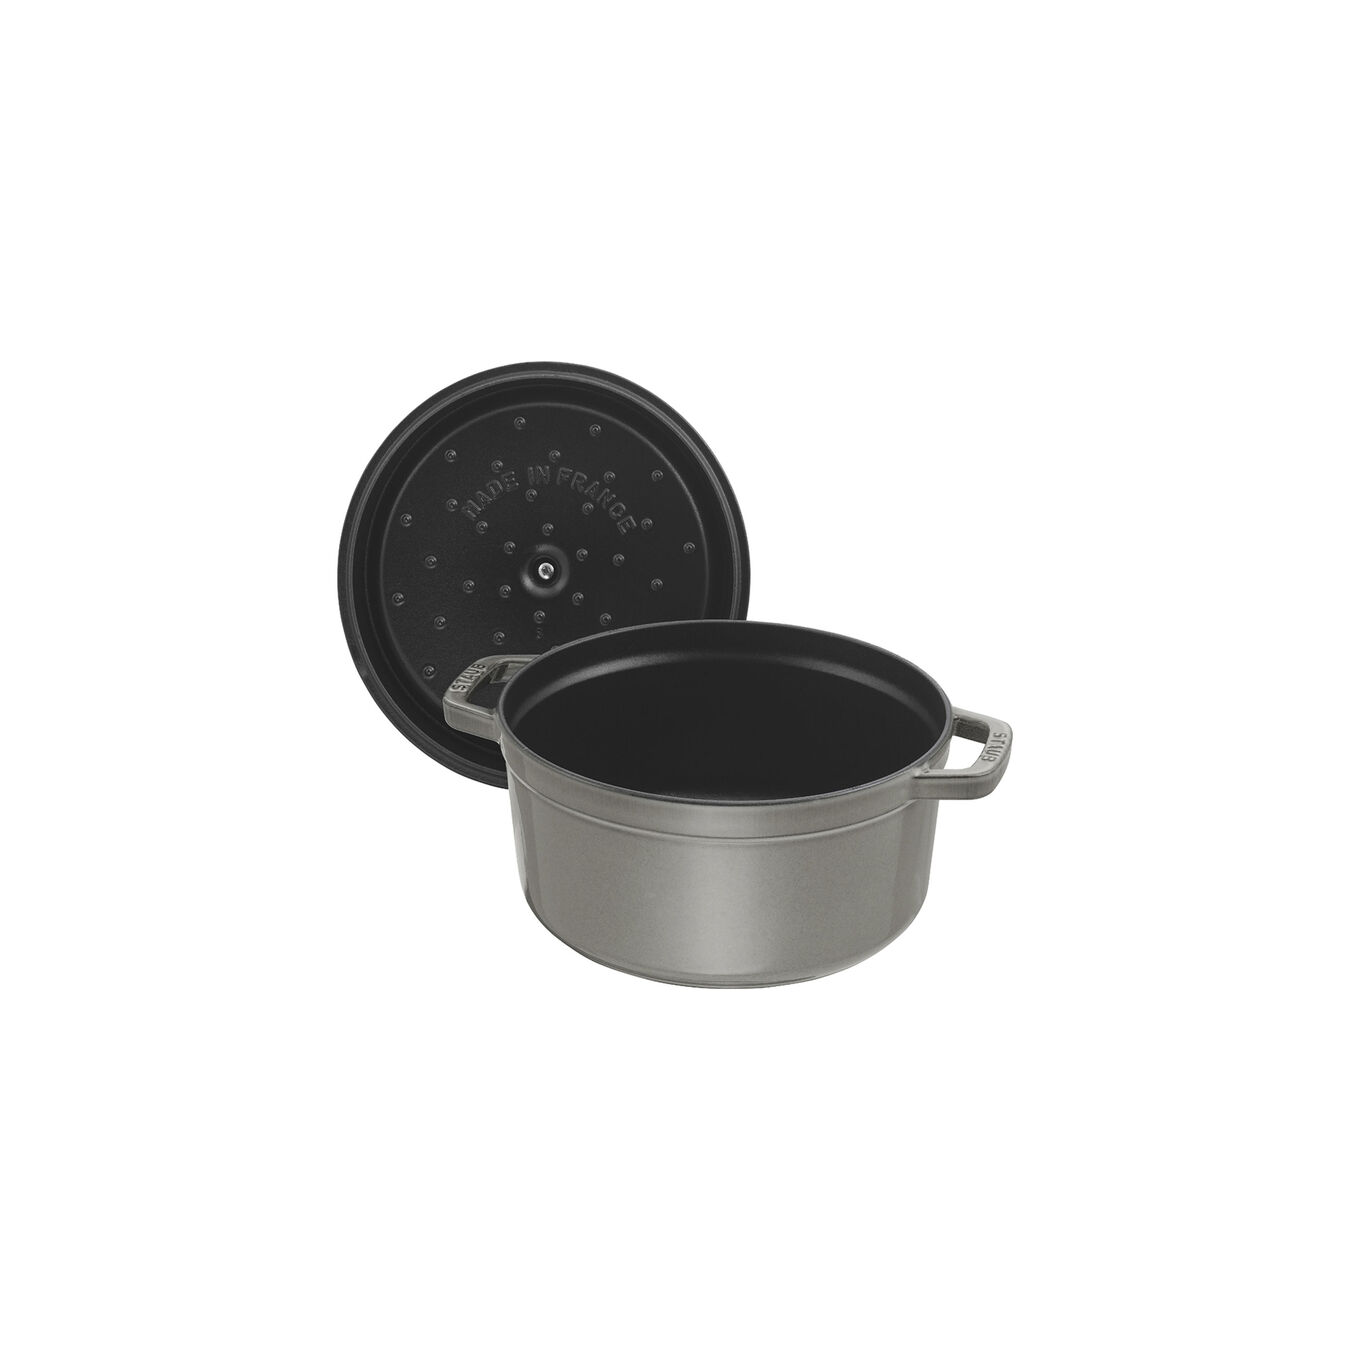 800 ml cast iron round Cocotte, graphite-grey - Visual Imperfections,,large 2